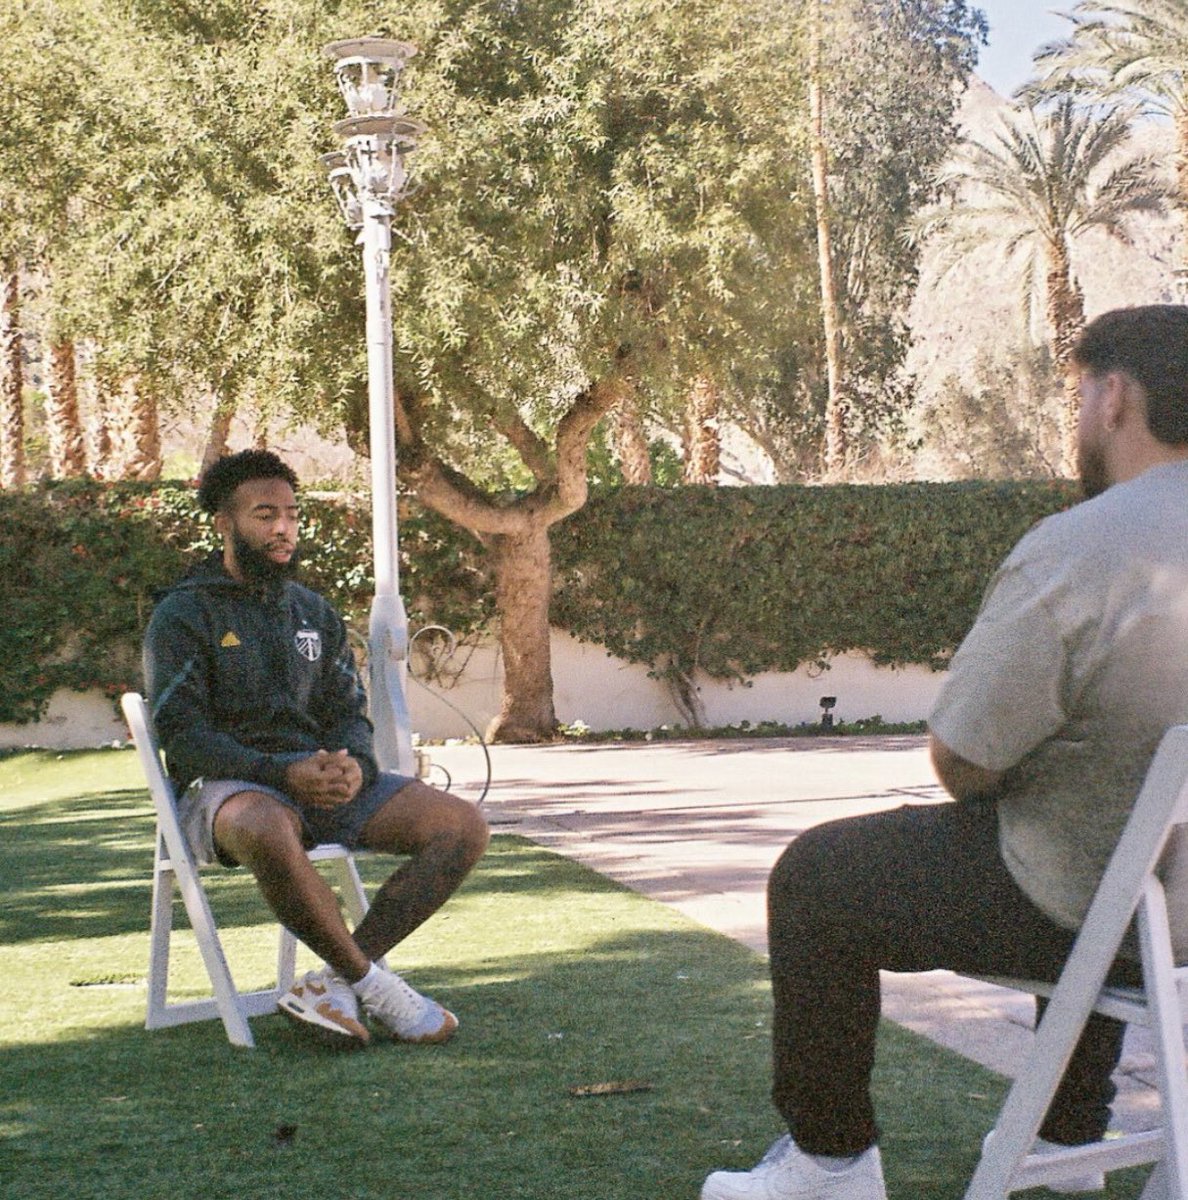 At Coachella, I sat down with Portland Timbers and US International, Eryk Williamson, for @90min_us. We discussed Portland's defense, the experience with the Canadian Internationals on the team, Diego Chara, and the reasons why Portland consistently produces MLS legends. The